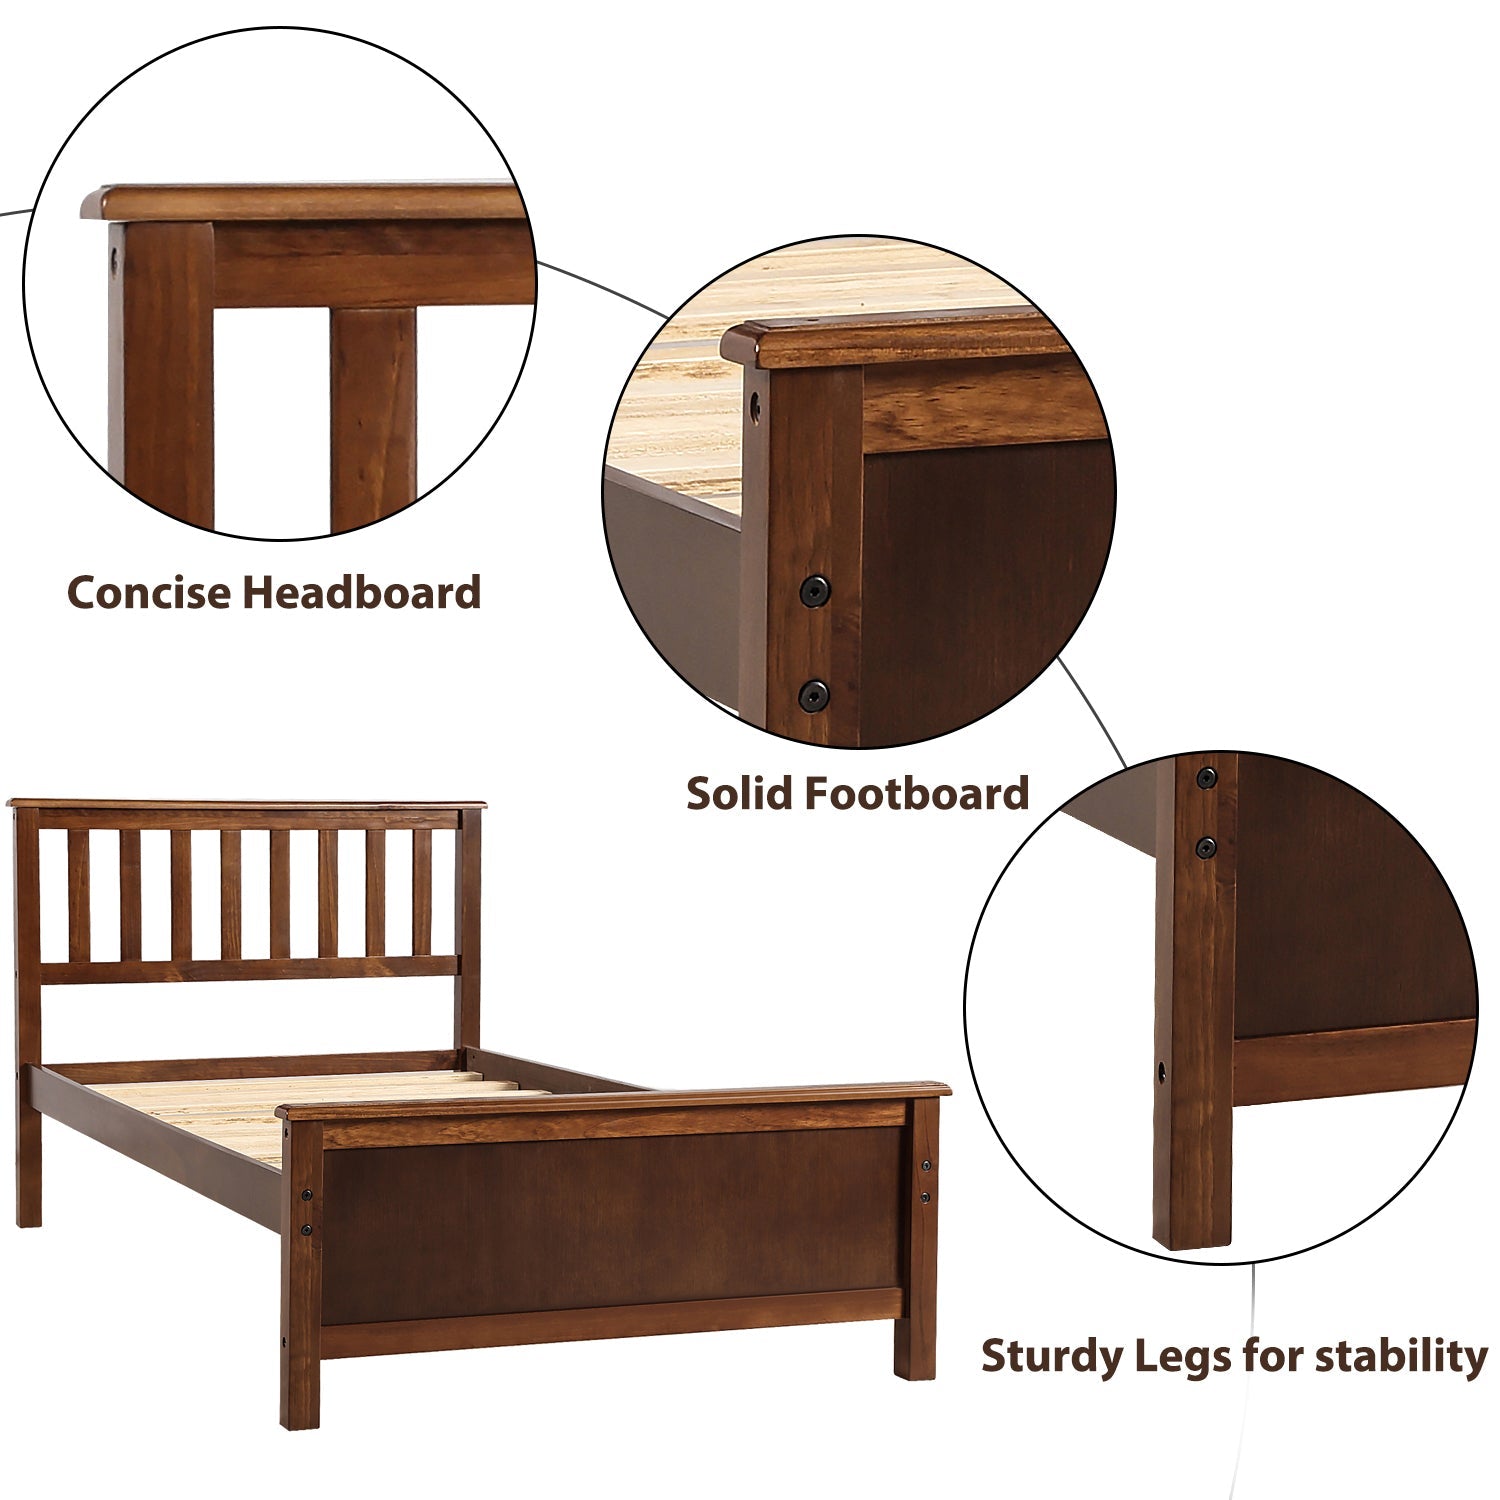 Twin Size Wood Platform Bed with Headboard, Footboard, and Wood Slat Support | Walnut Finish | Sturdy Construction